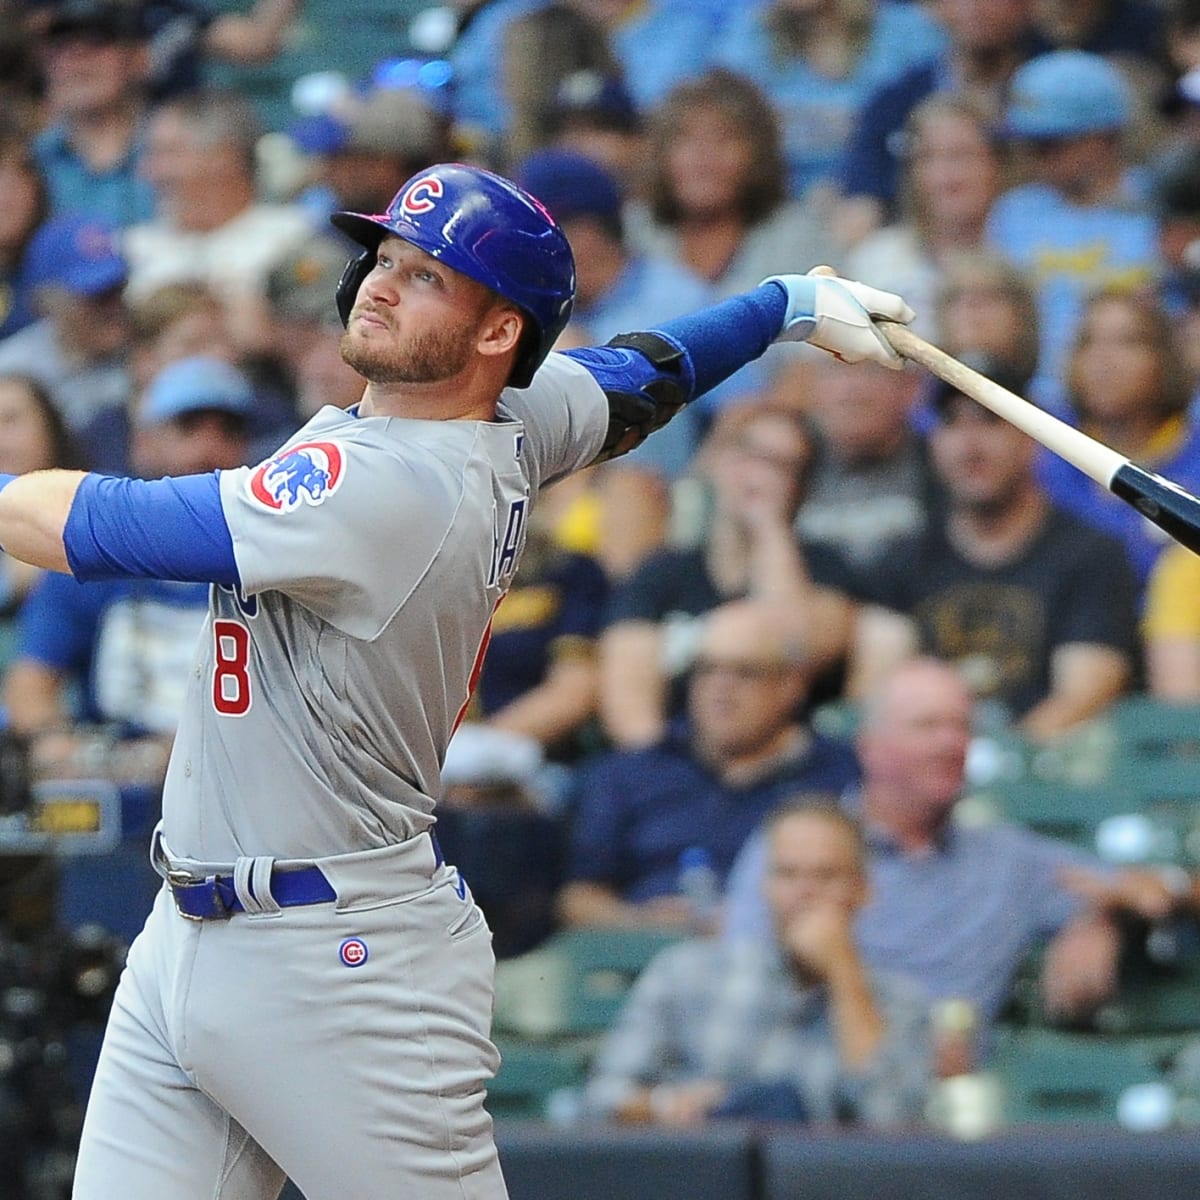 Chicago Cubs won't risk Kyle Schwarber in outfield for Wrigley Field games, Chicago Cubs